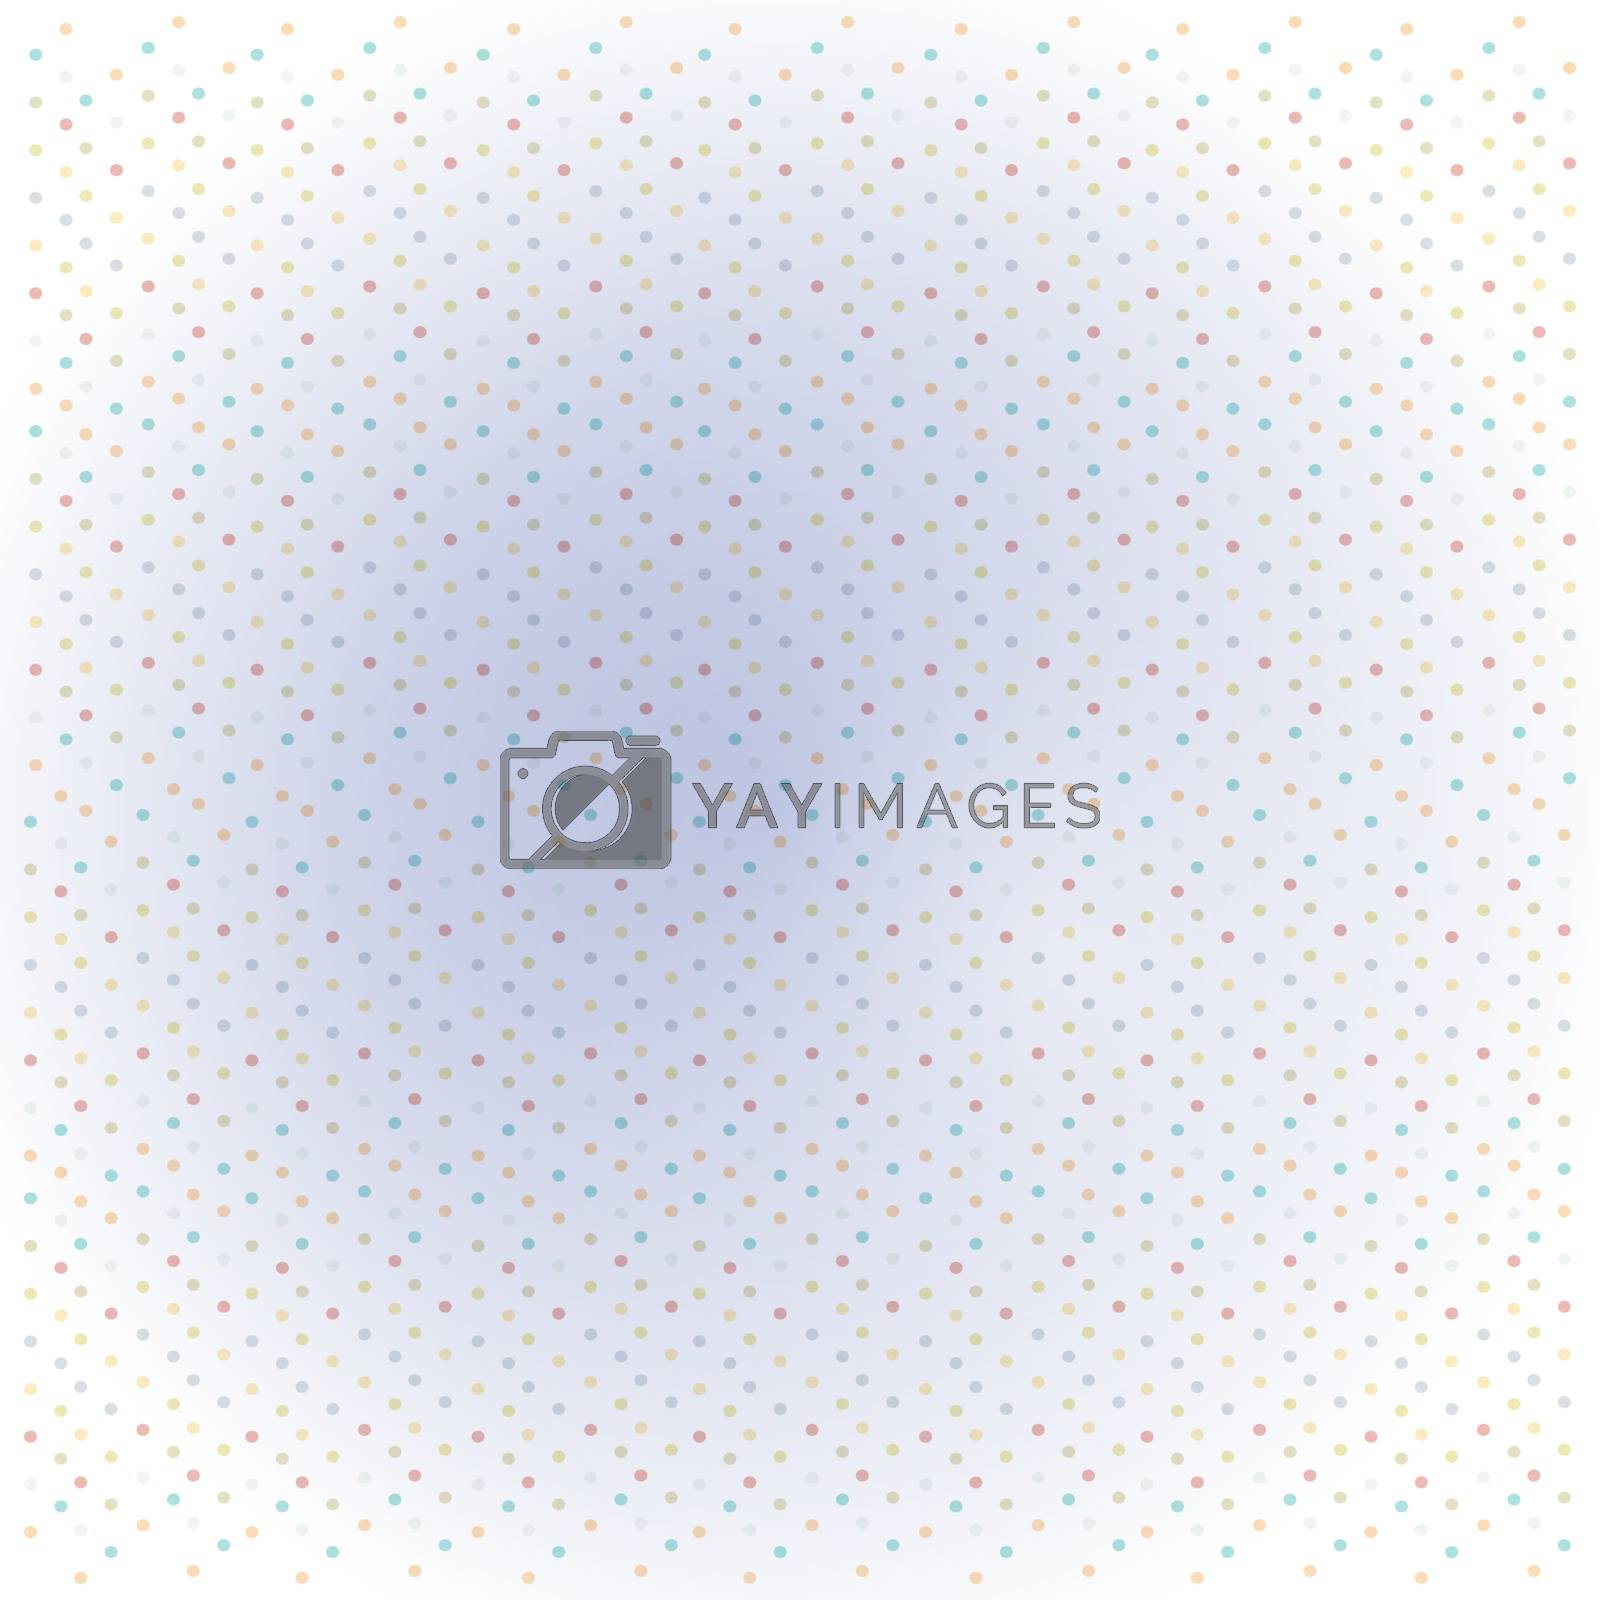 Royalty free image of funny background with dots by balasoiu